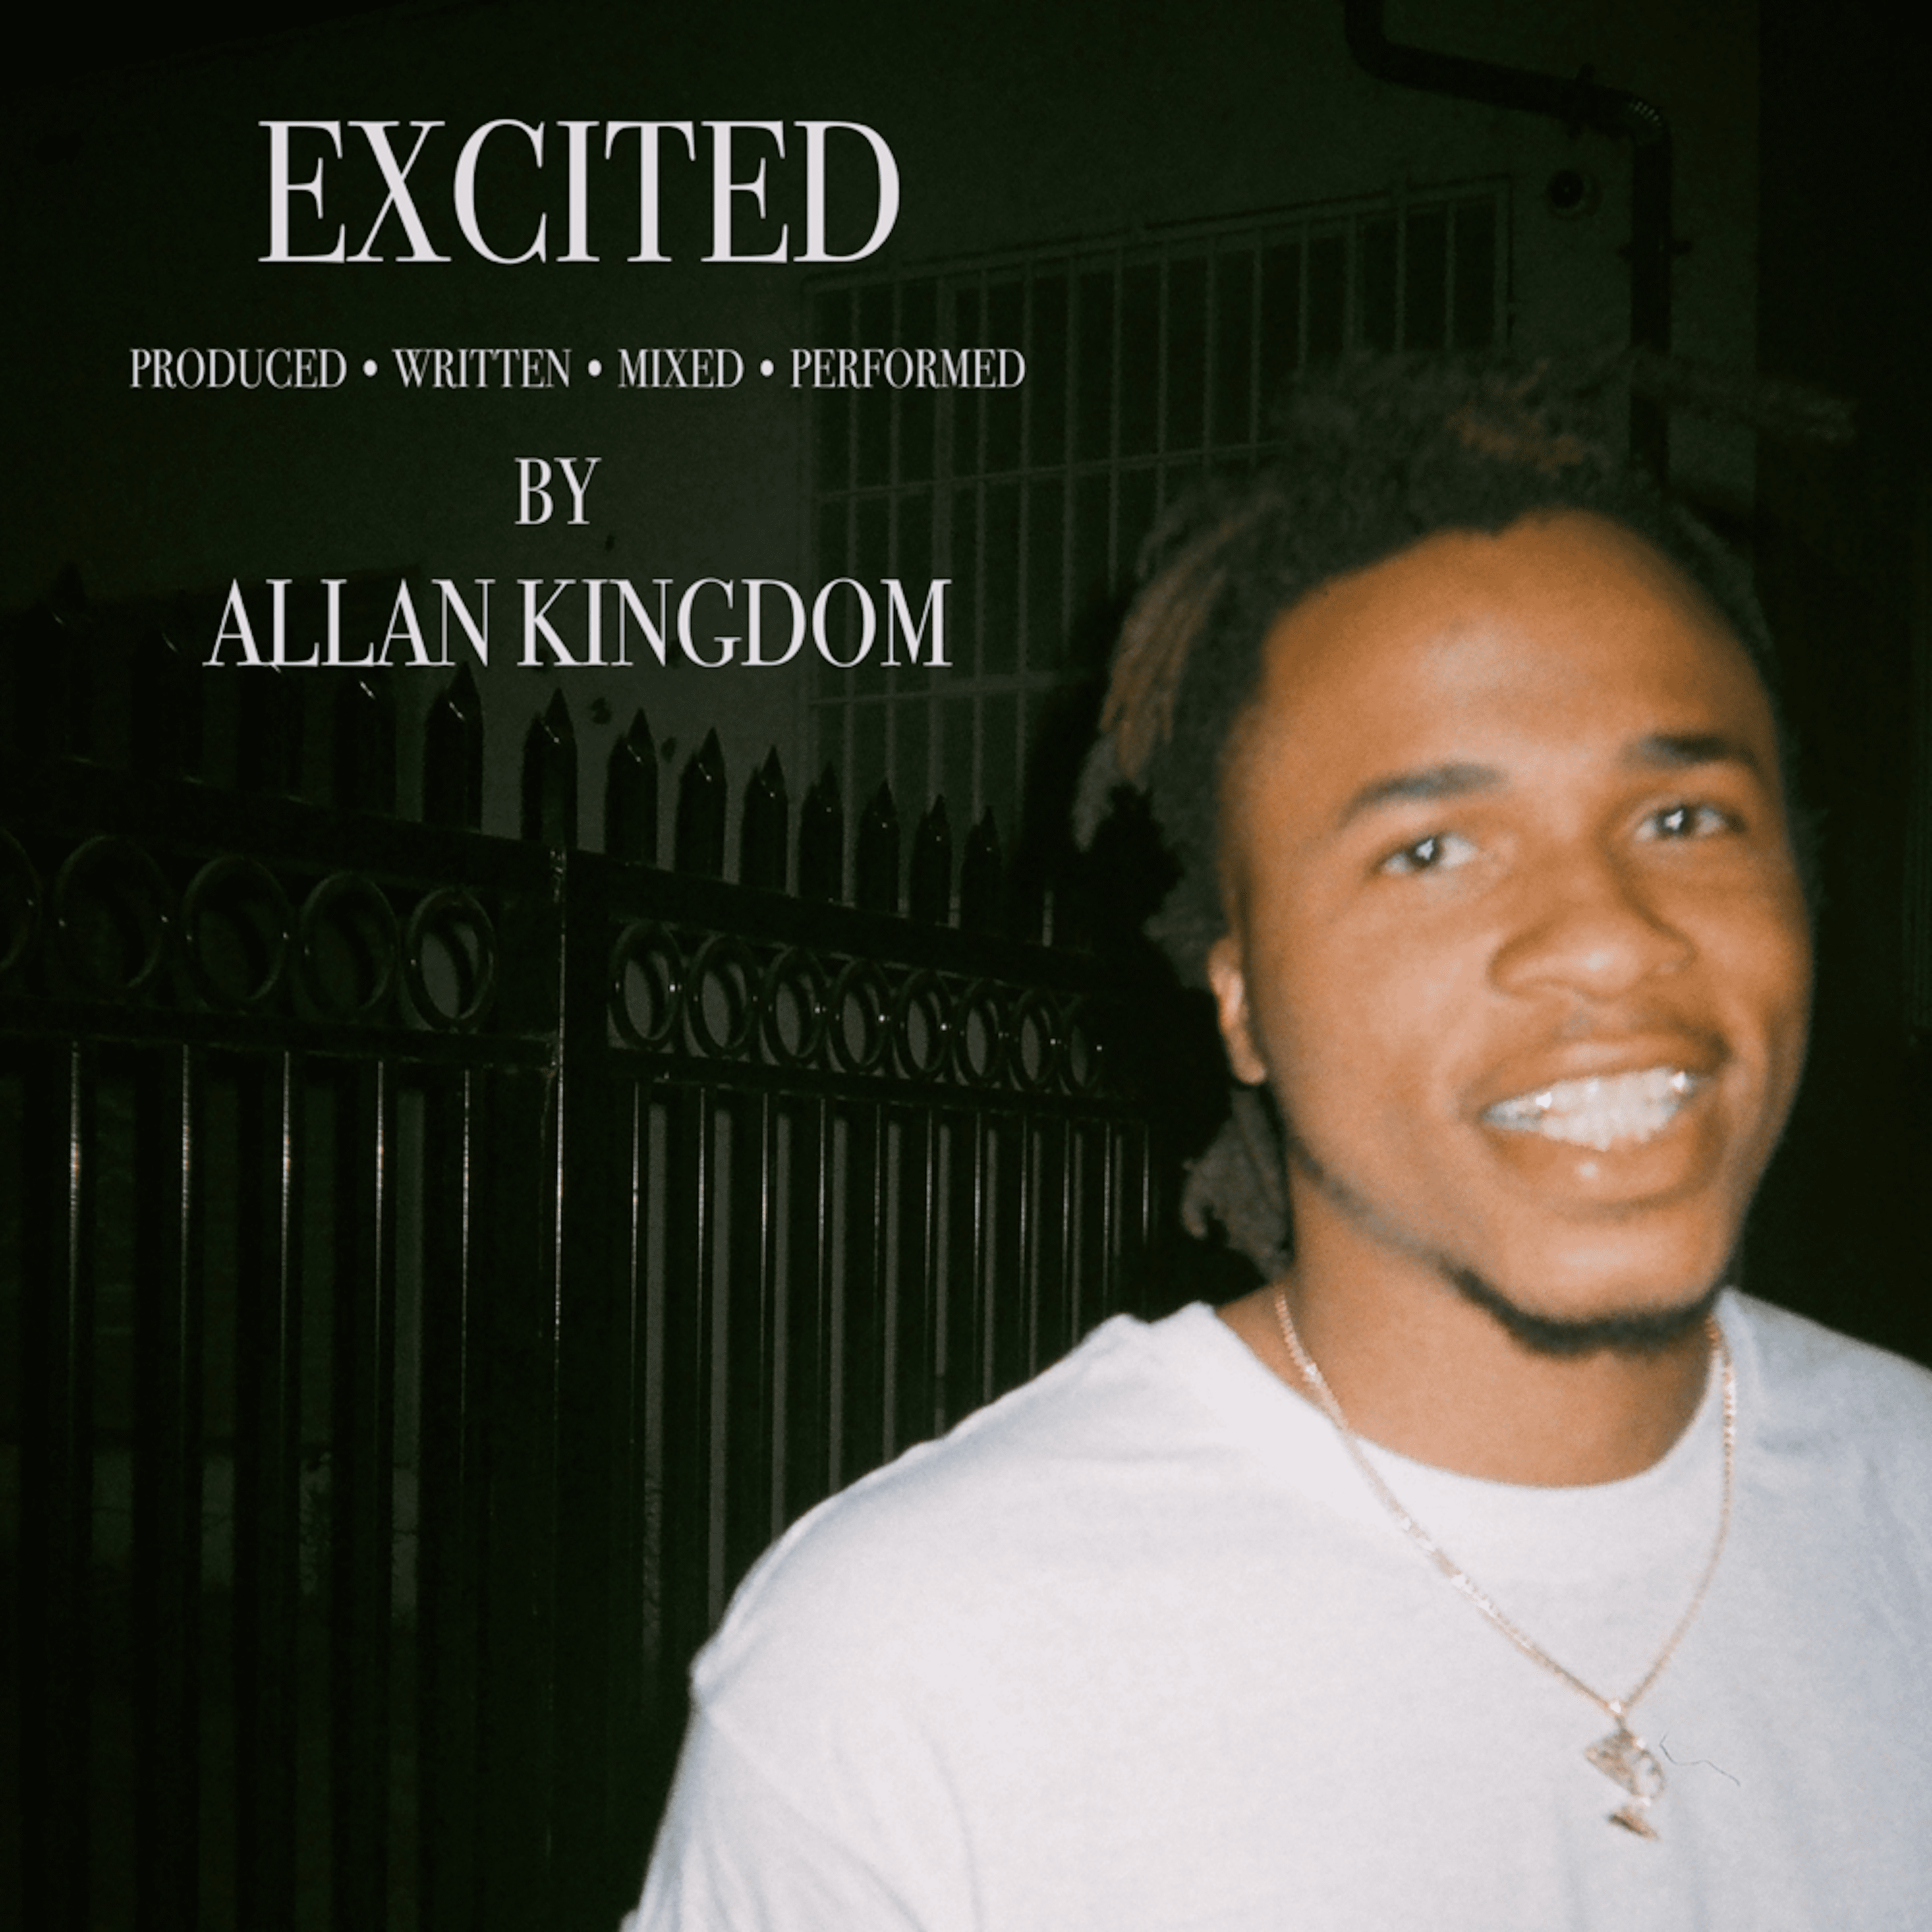 Cover art for EXCITED (2020) by Allan Kingdom